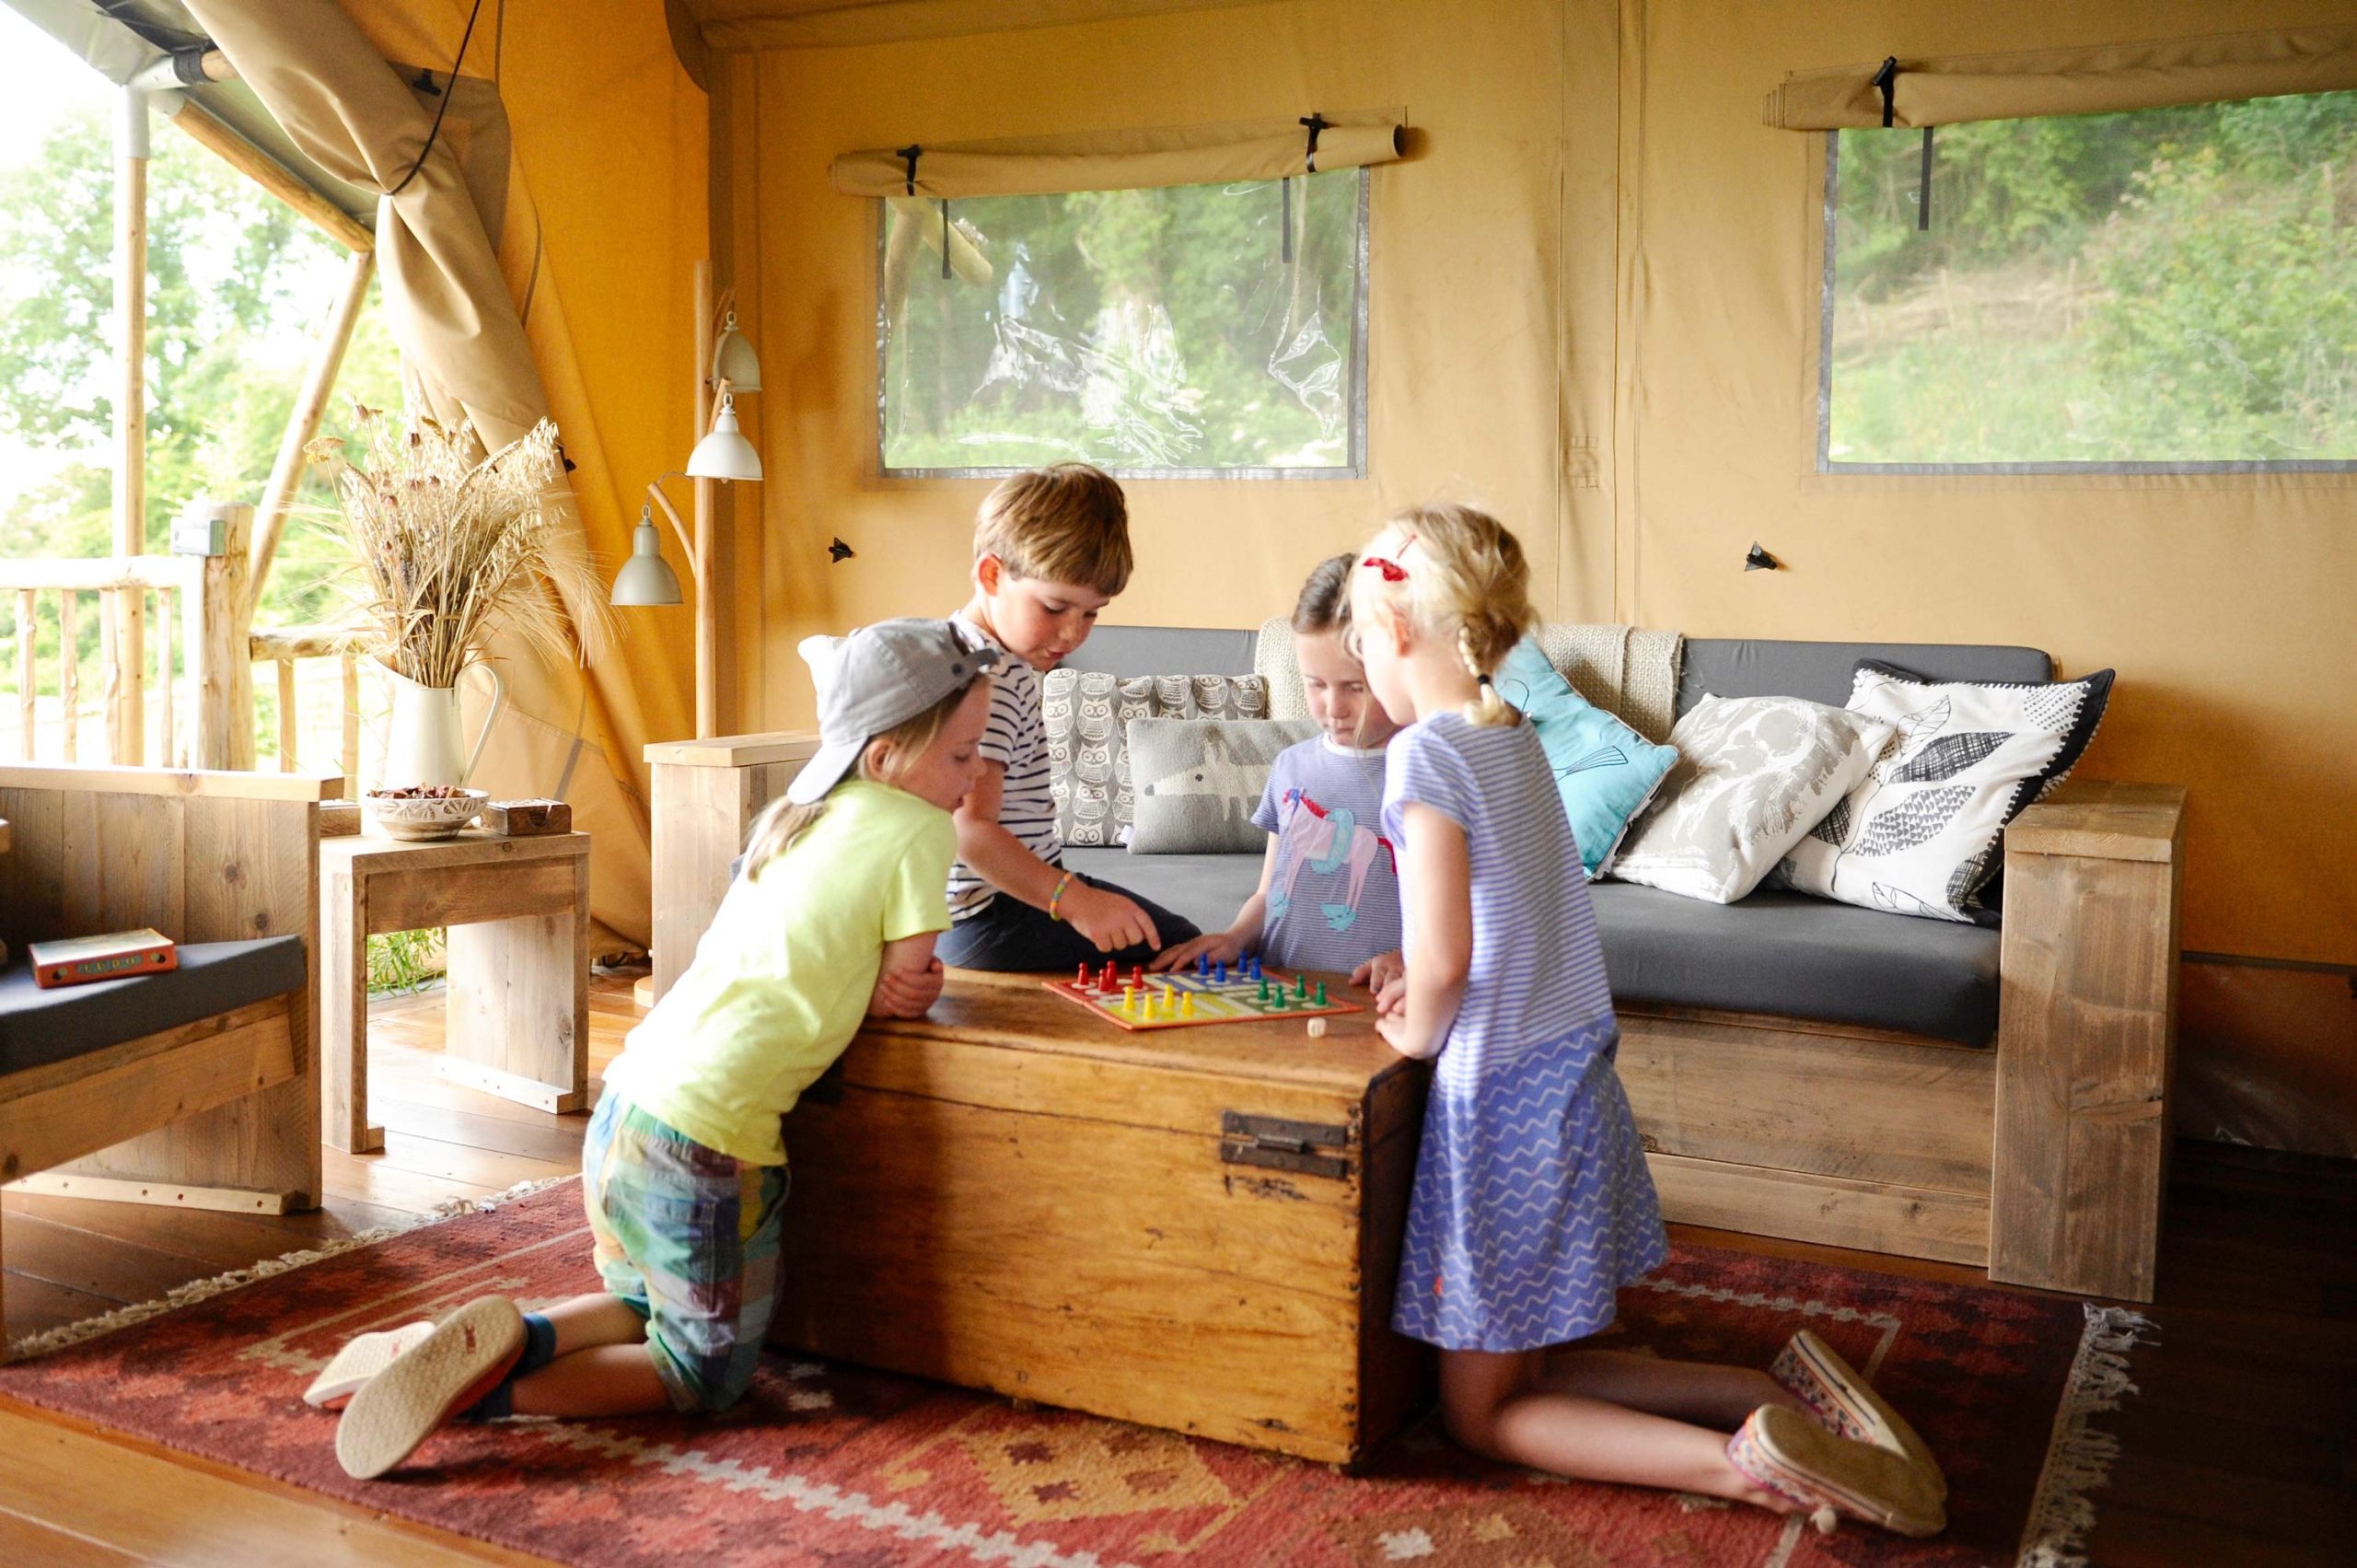 Children playing a board game in the lounge area of one of the Lodges at Loose Reins